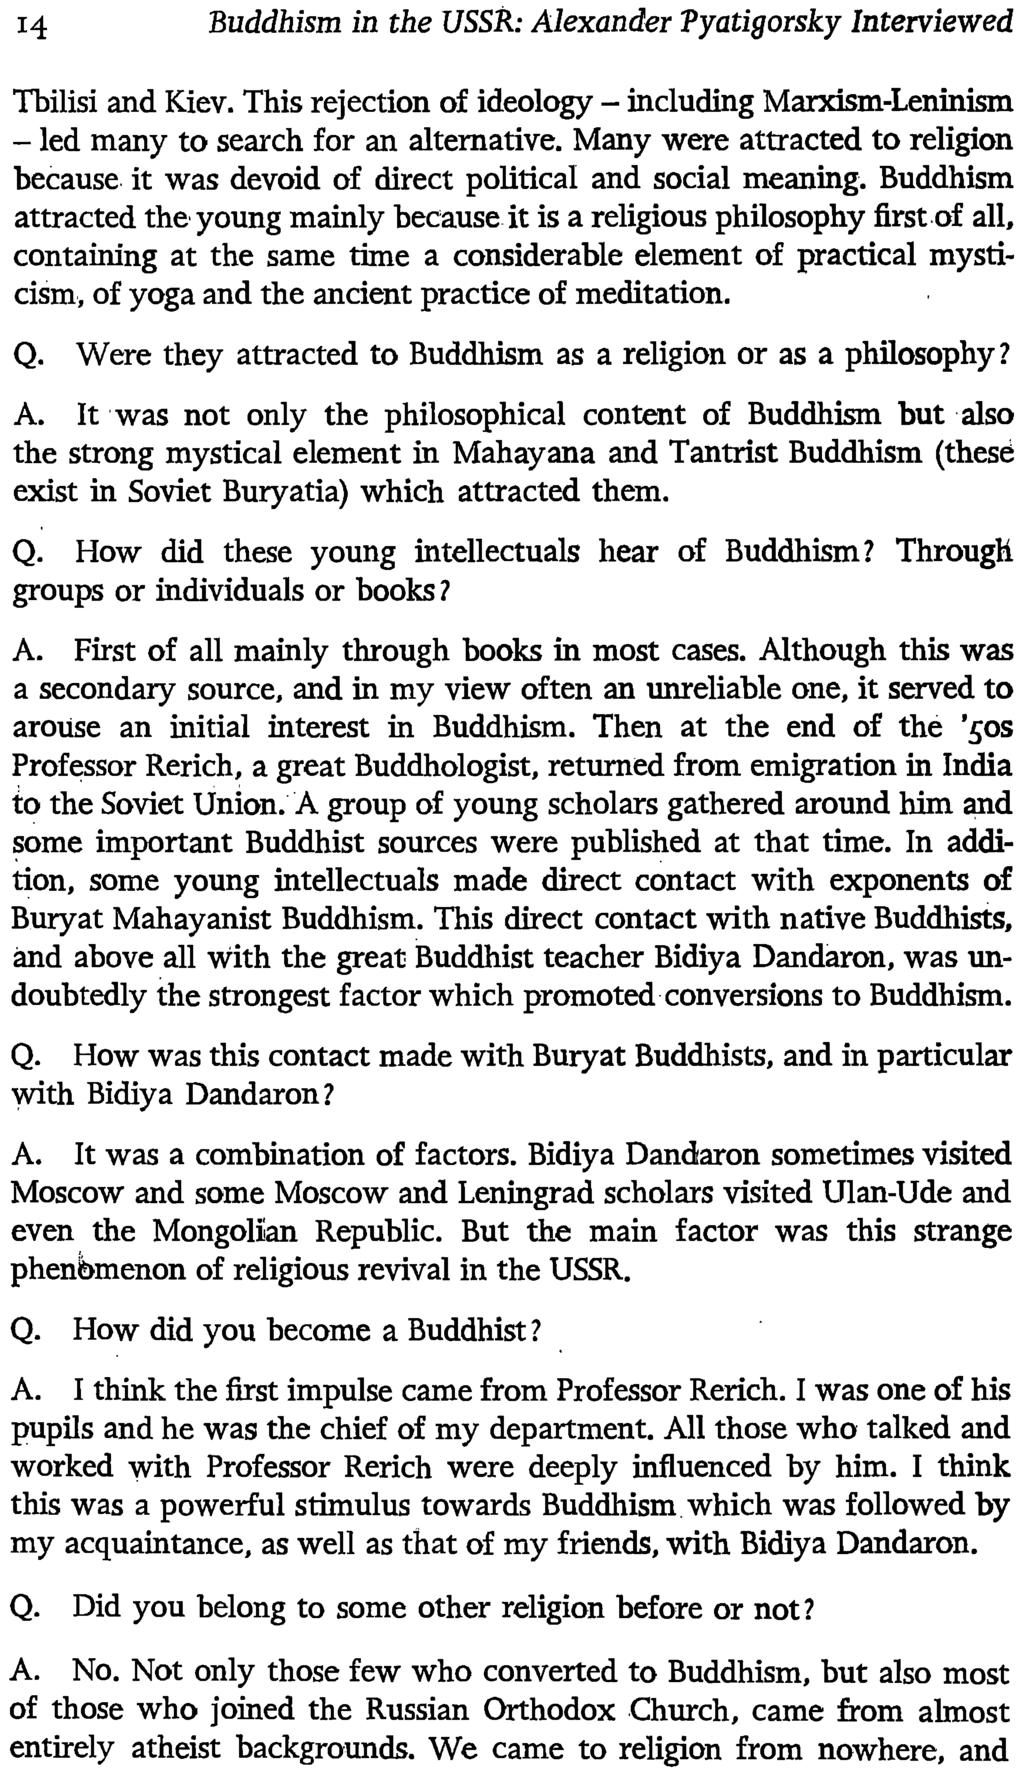 14 Buddhism in the USSR: Alexander Pyatigorsky Interviewed Tbilisi and Kiev. This rejection of ideology - including Marxism-Leninism - led many to search for an alternative.